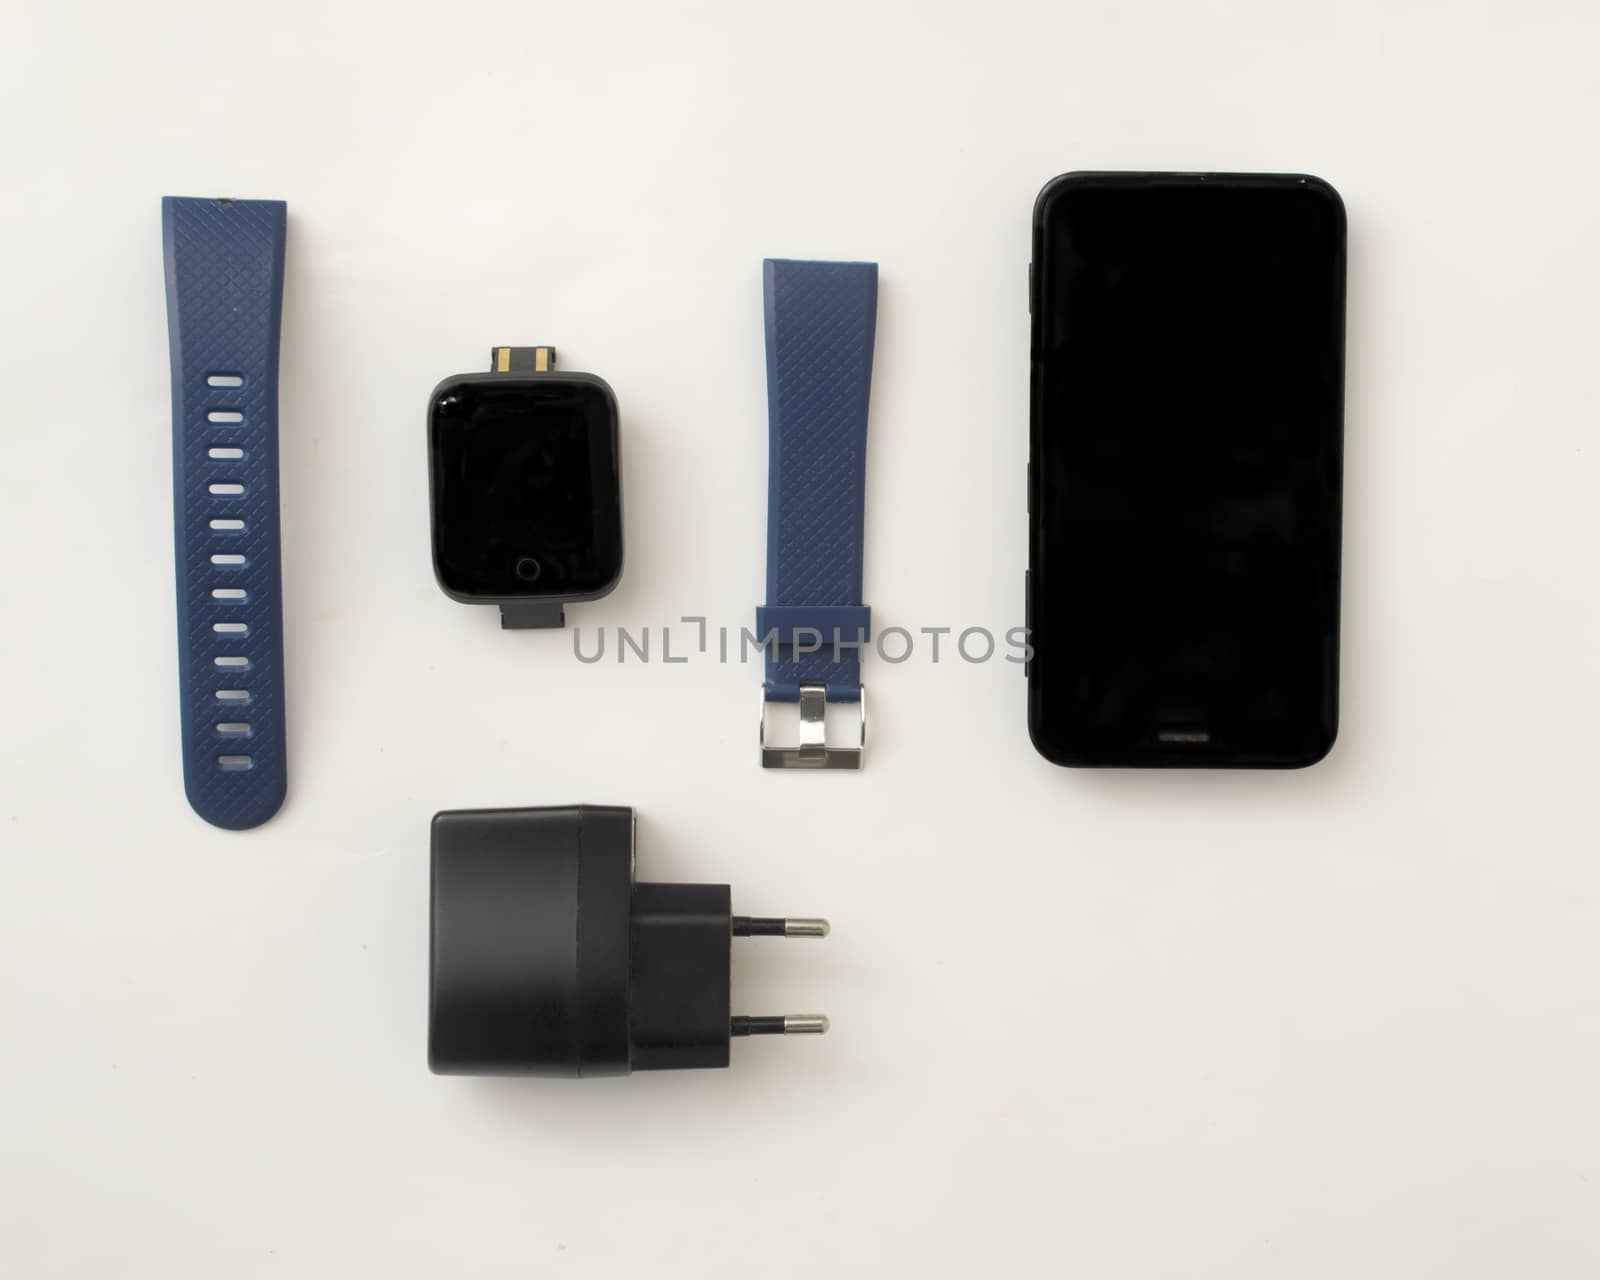 Layout of smart watch accessories. by andre_dechapelle